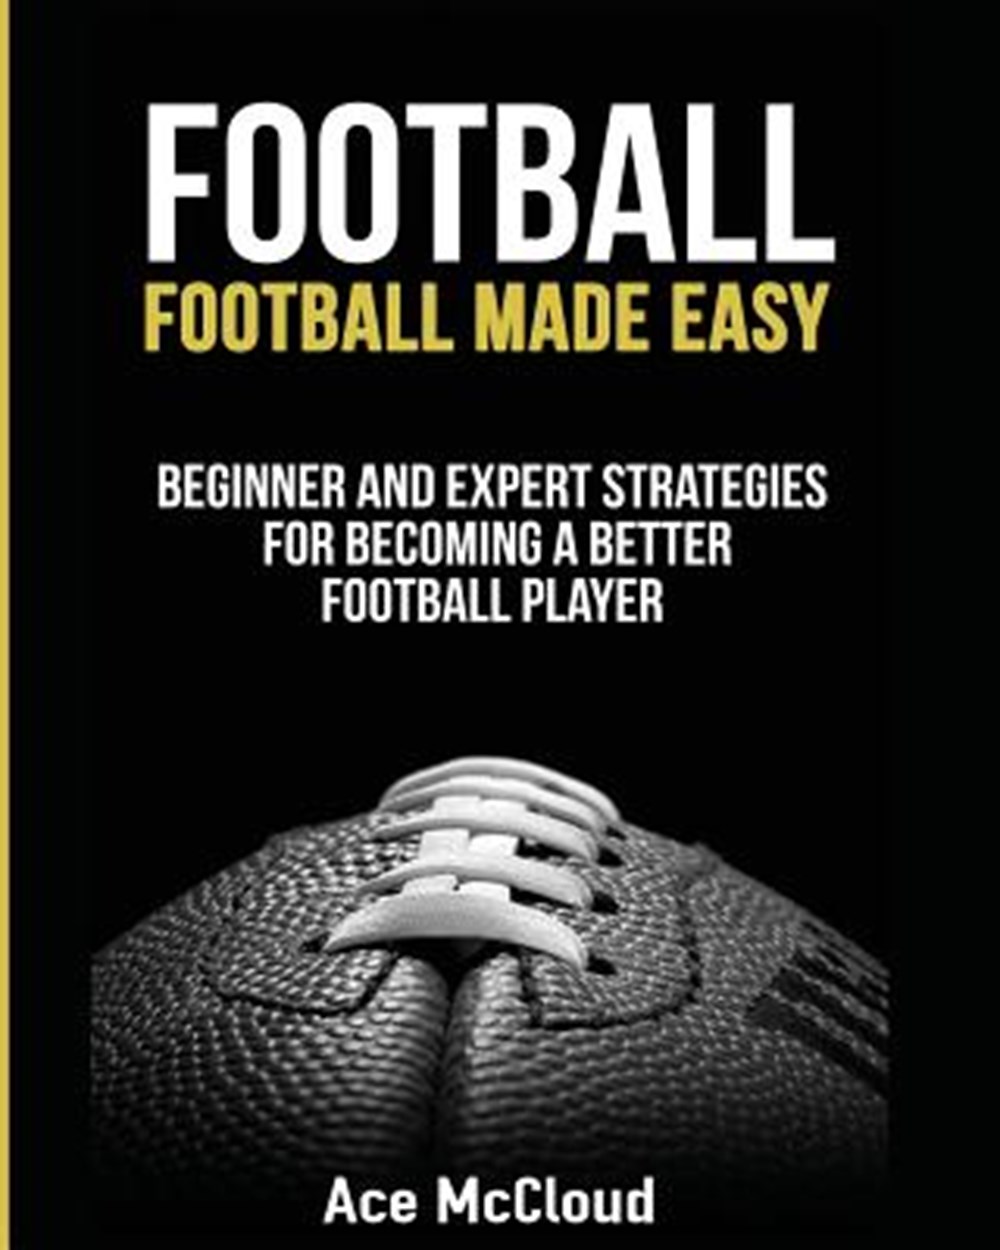 Football Football Made Easy: Beginner and Expert Strategies For Becoming A Better Football Player